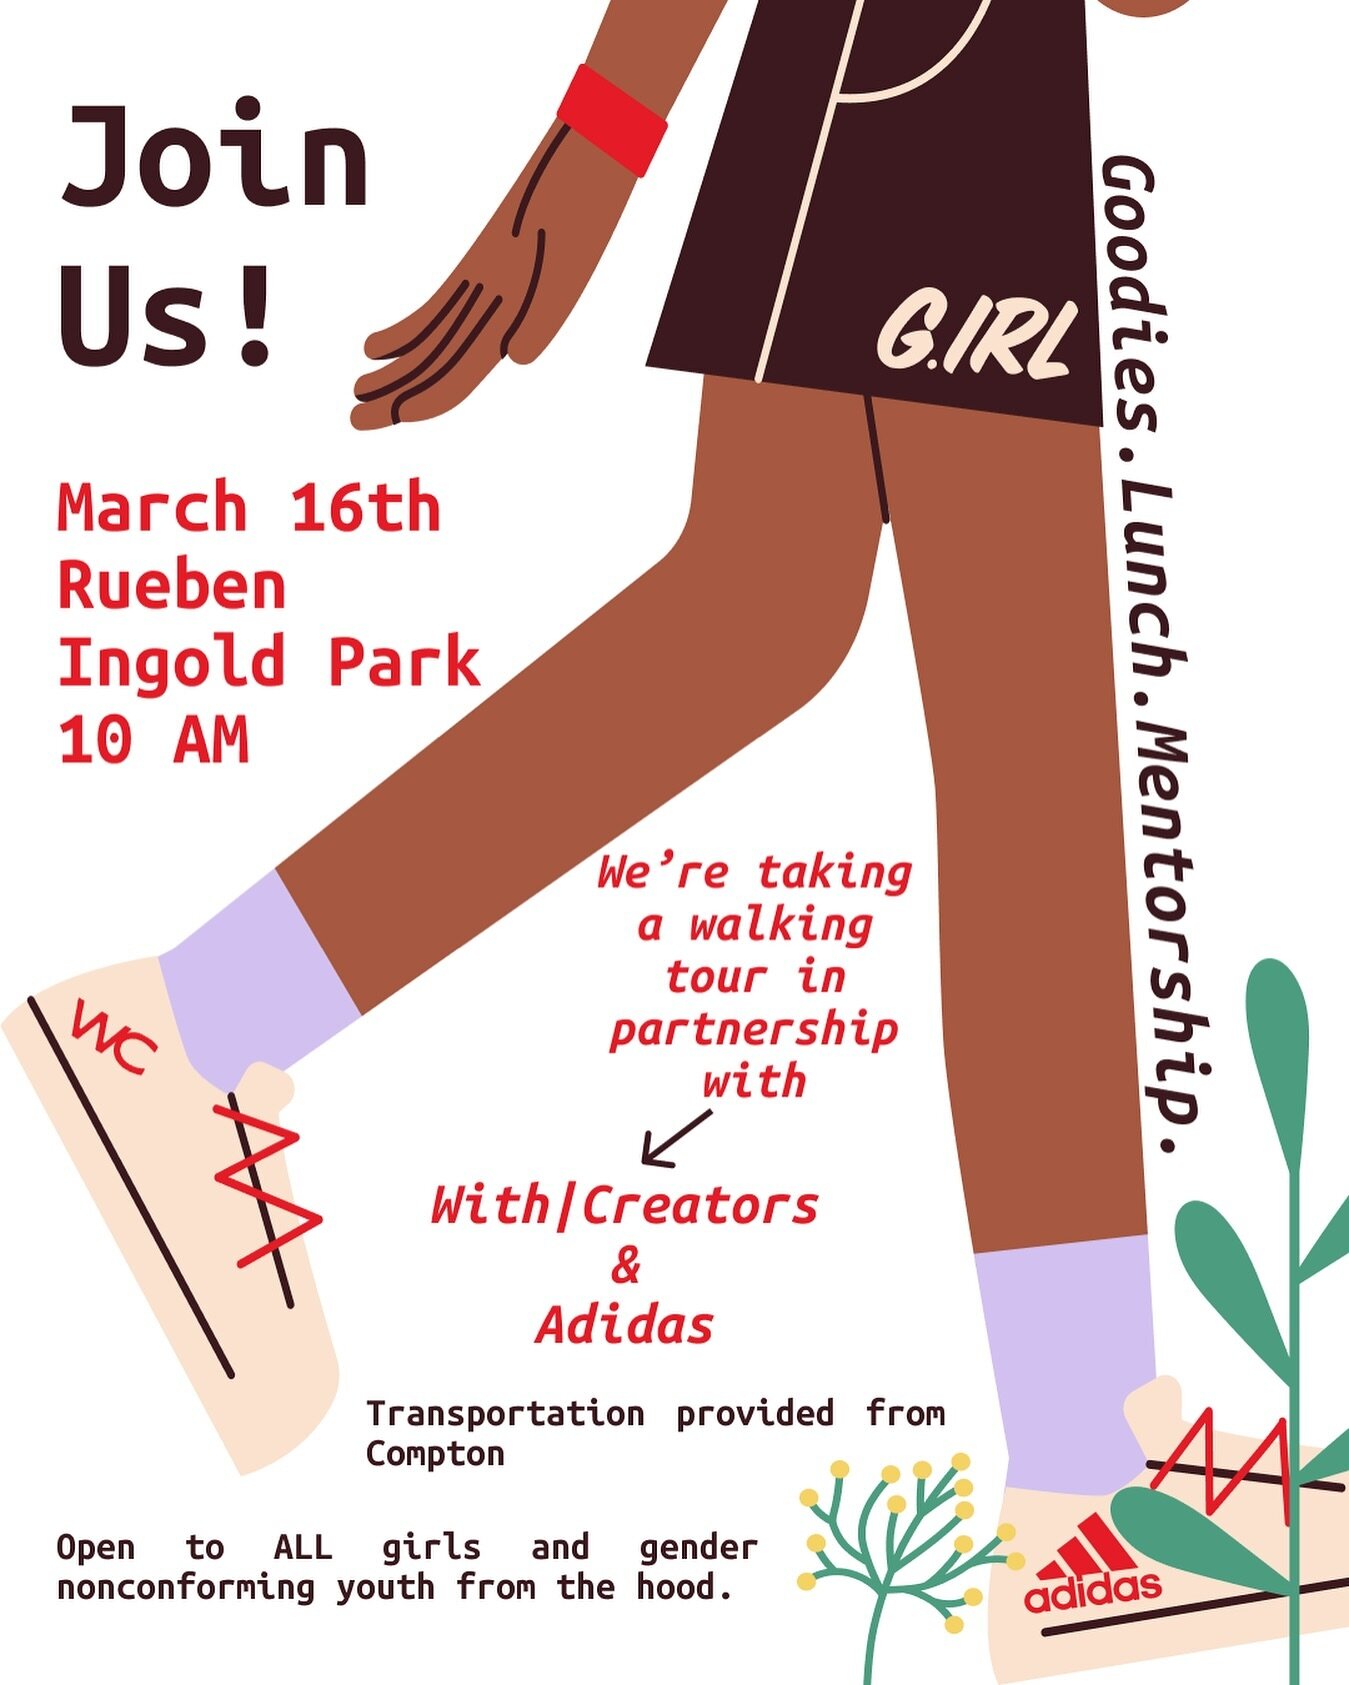 Join us on Saturday, March 16th, for a trip to Reuben Ingold Park.

In partnership with, With/ Creators Walking Club will create a space for collective moment, leisure and mindfulness. In the spirit of togetherness,  guides will co-host the walk with